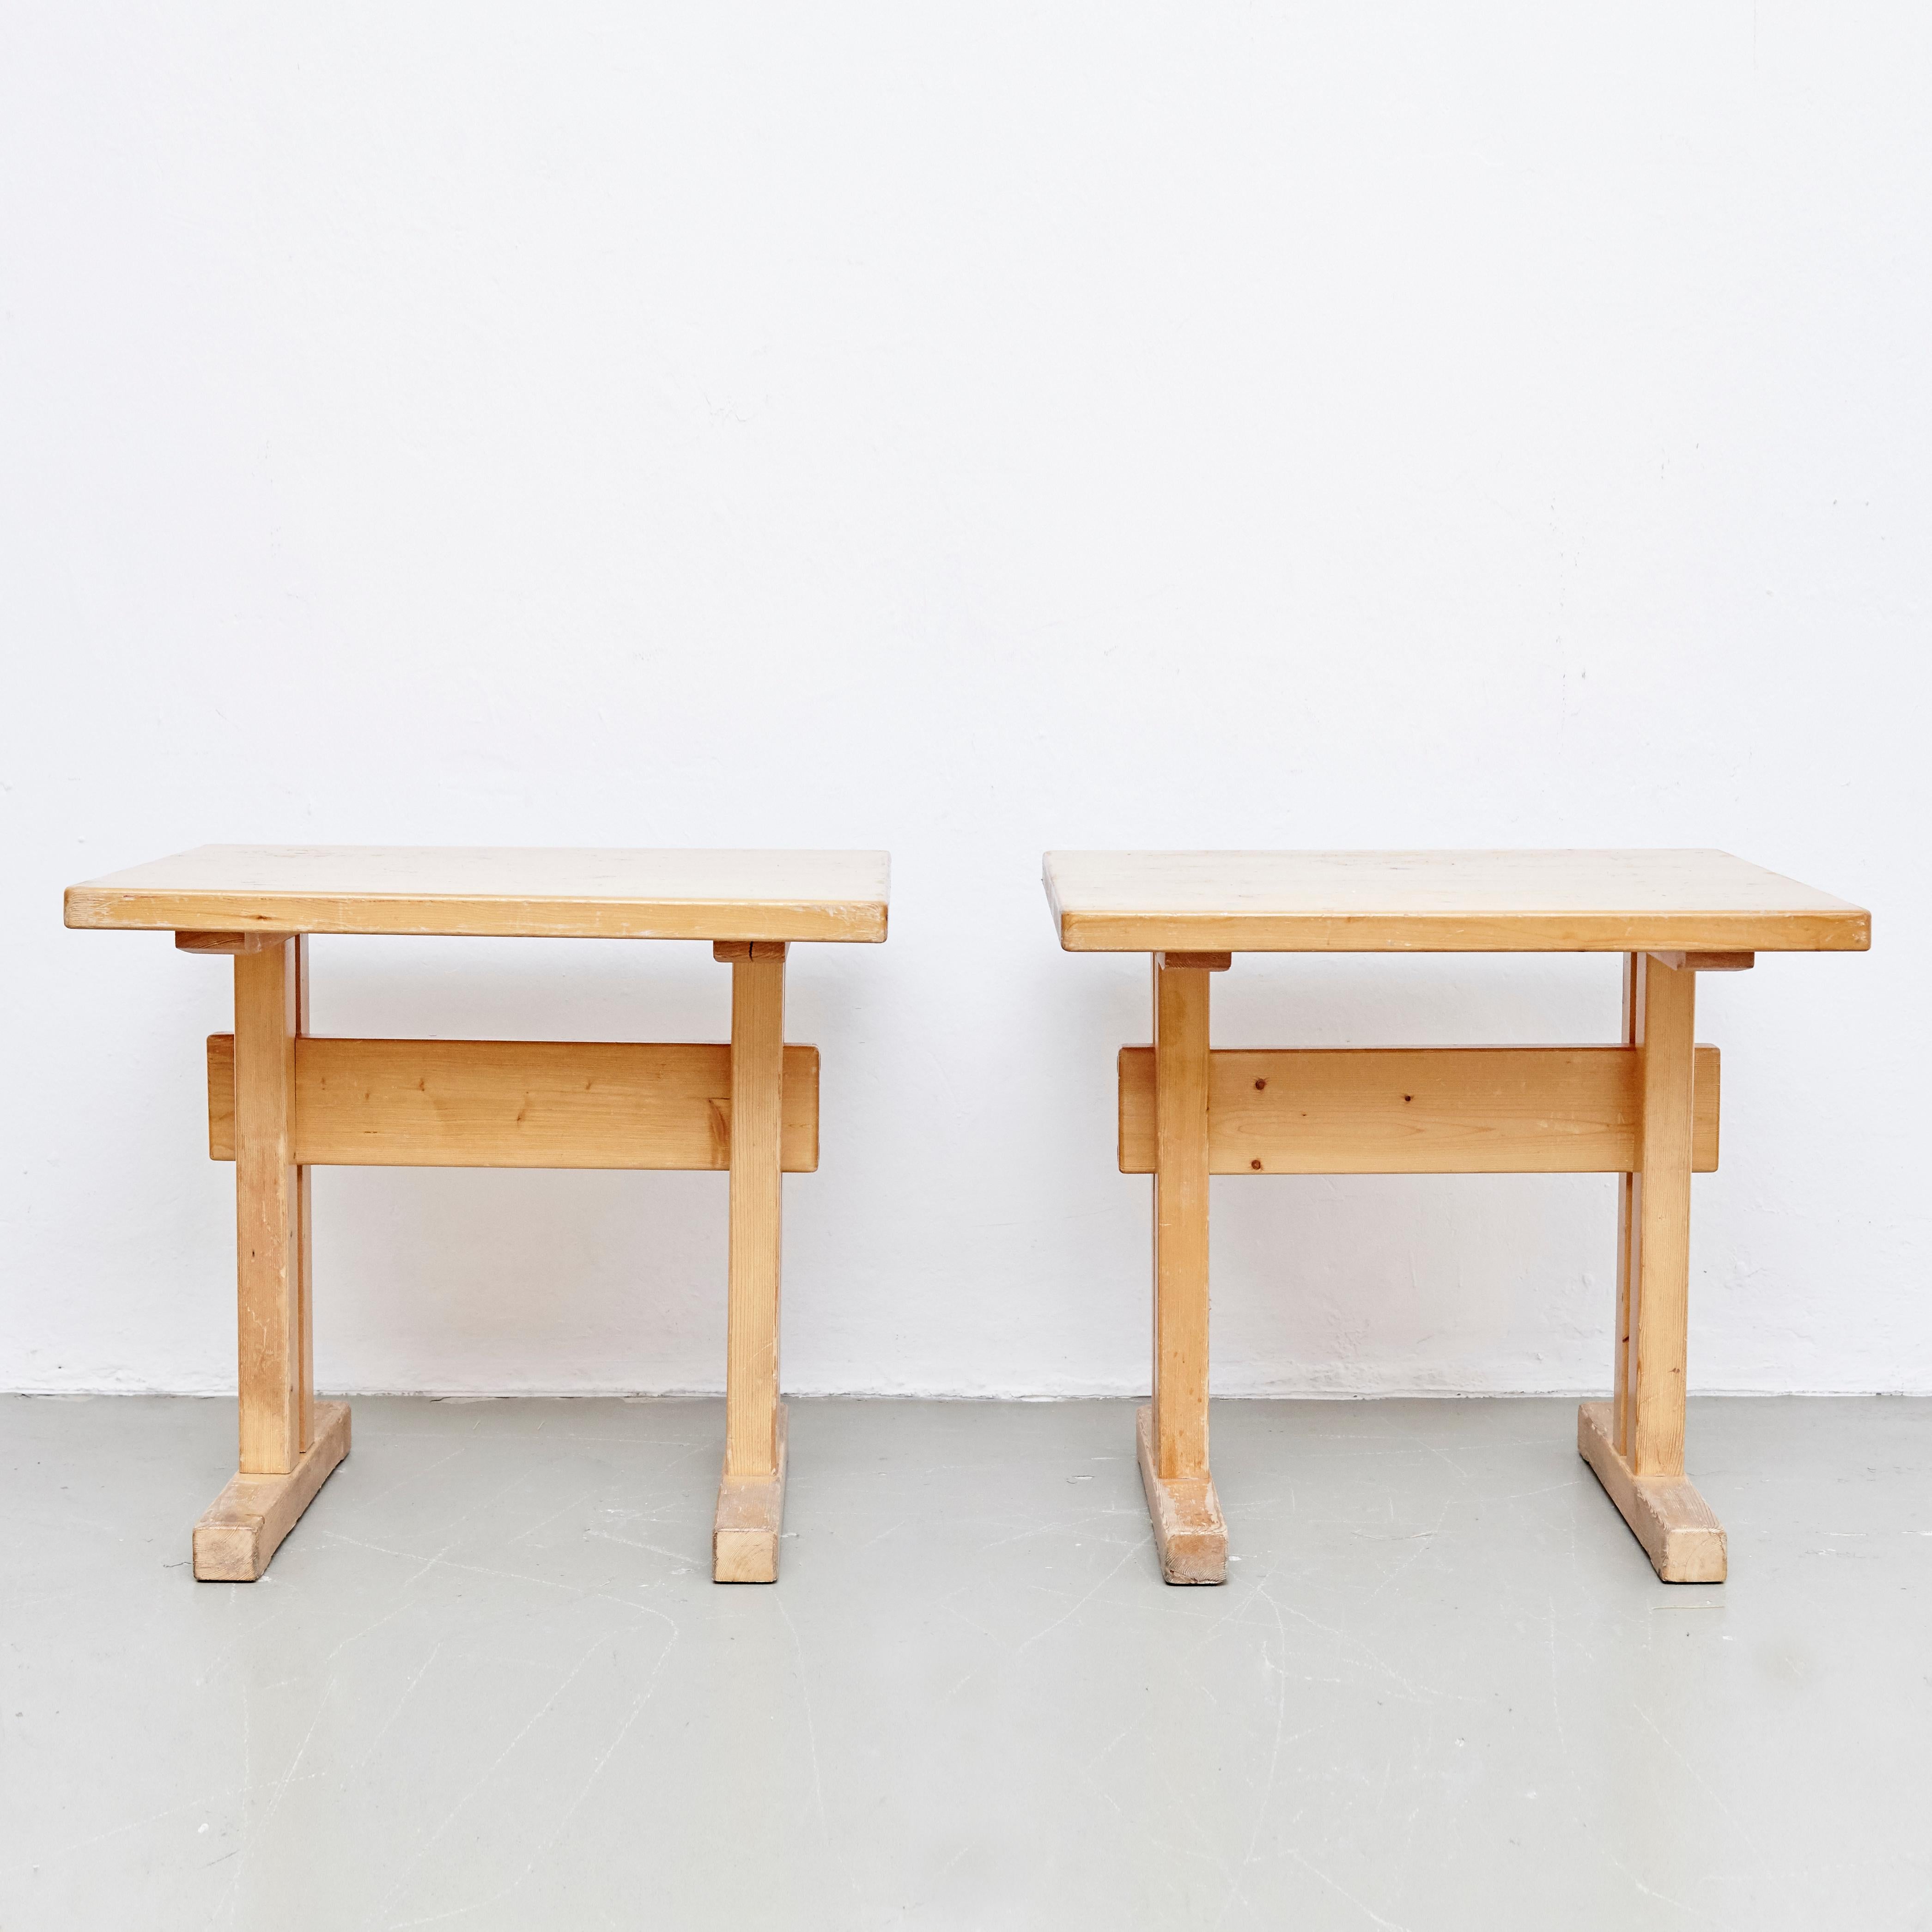 Two tables designed by Charlotte Perriand for Les Arcs ski resort circa 1960, manufactured in France.
Pinewood.

In original condition, with wear consistent with age and use, preserving a beautiful patina.

Each table: 80 W x 67.5 D x 71 H